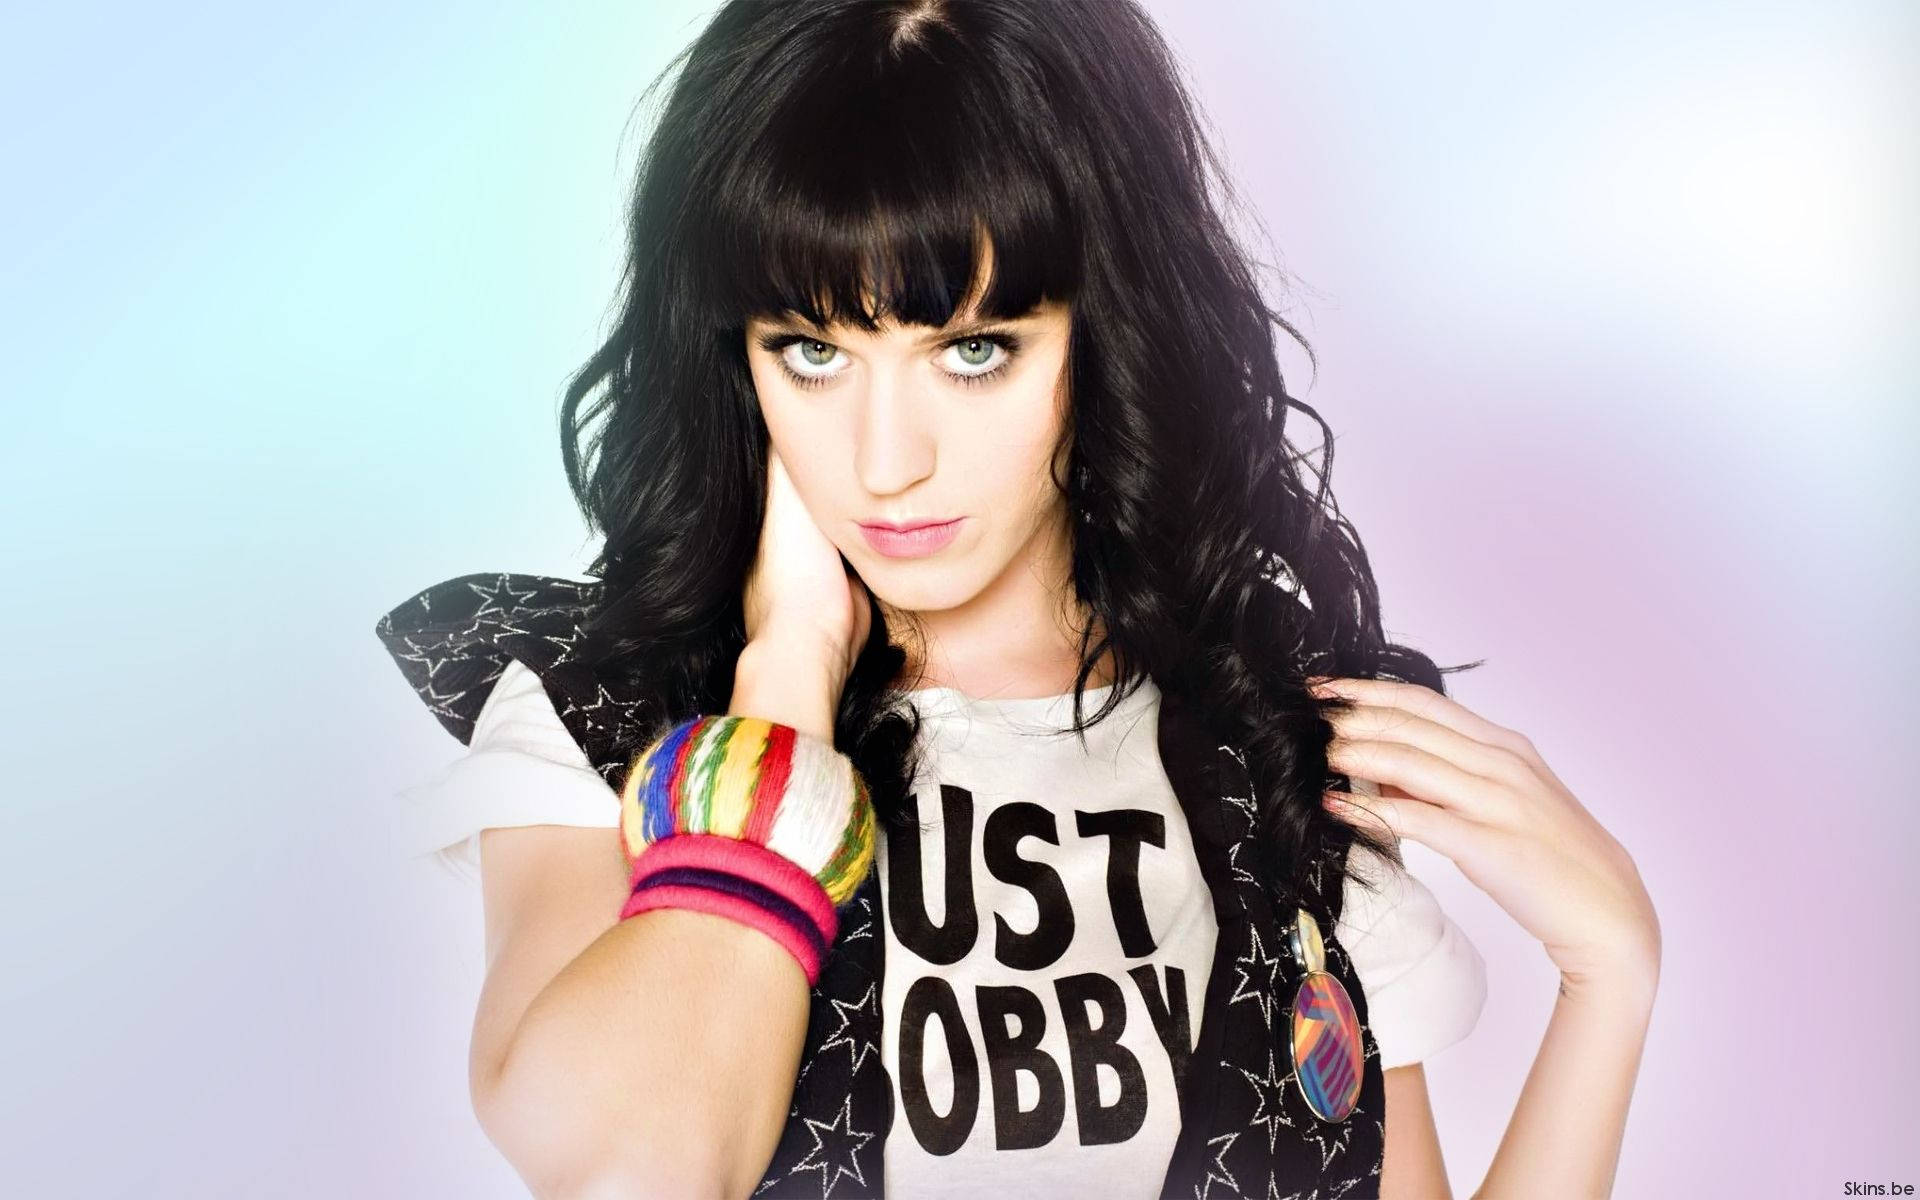 1920X1200 Katy Perry Wallpaper and Background